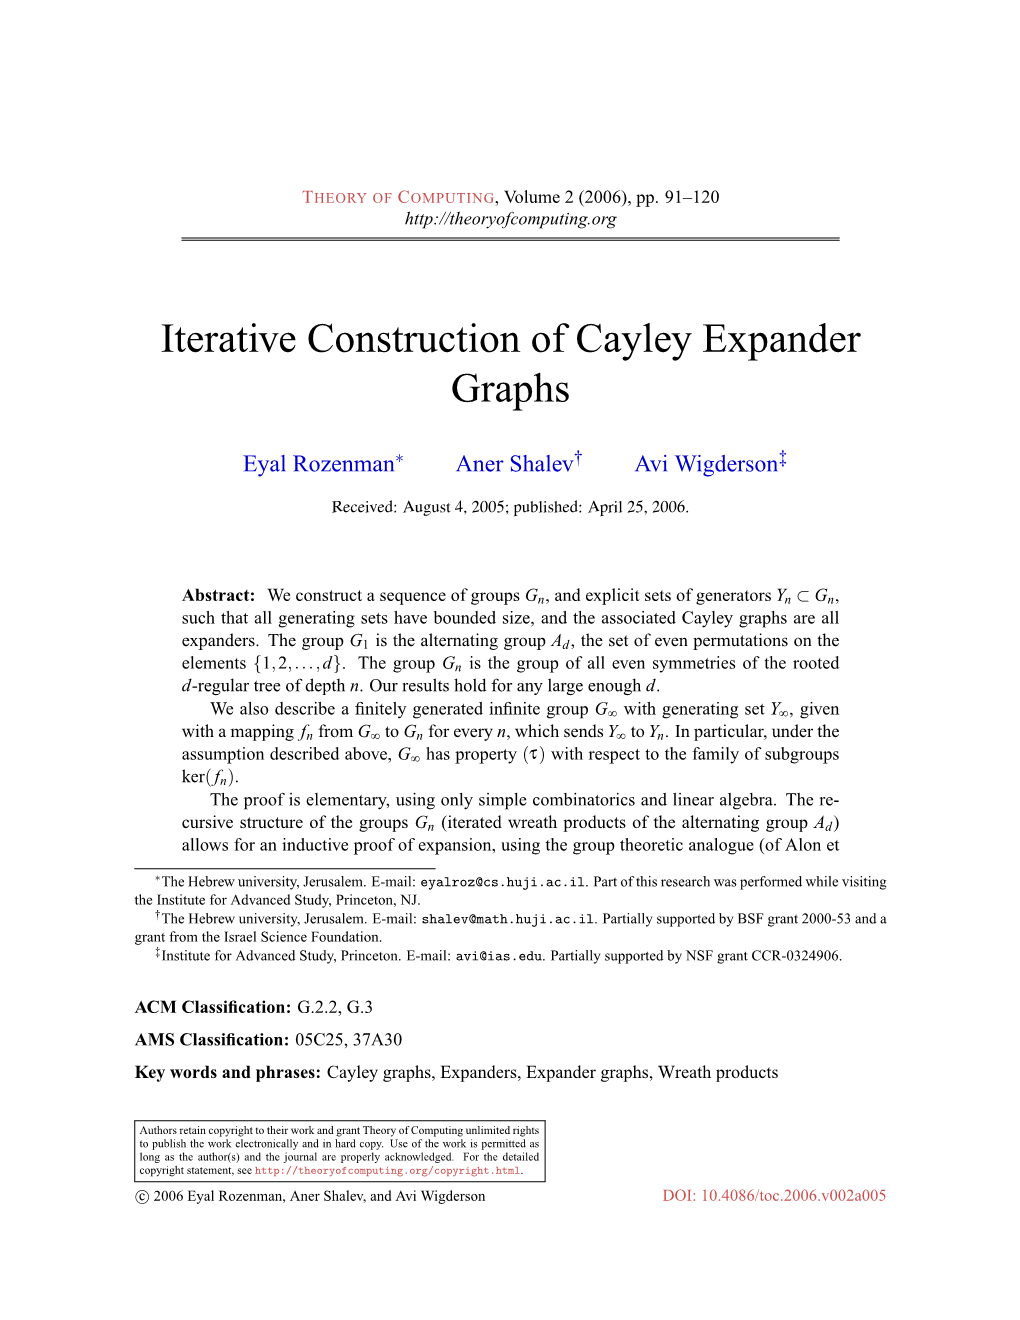 Iterative Construction of Cayley Expander Graphs